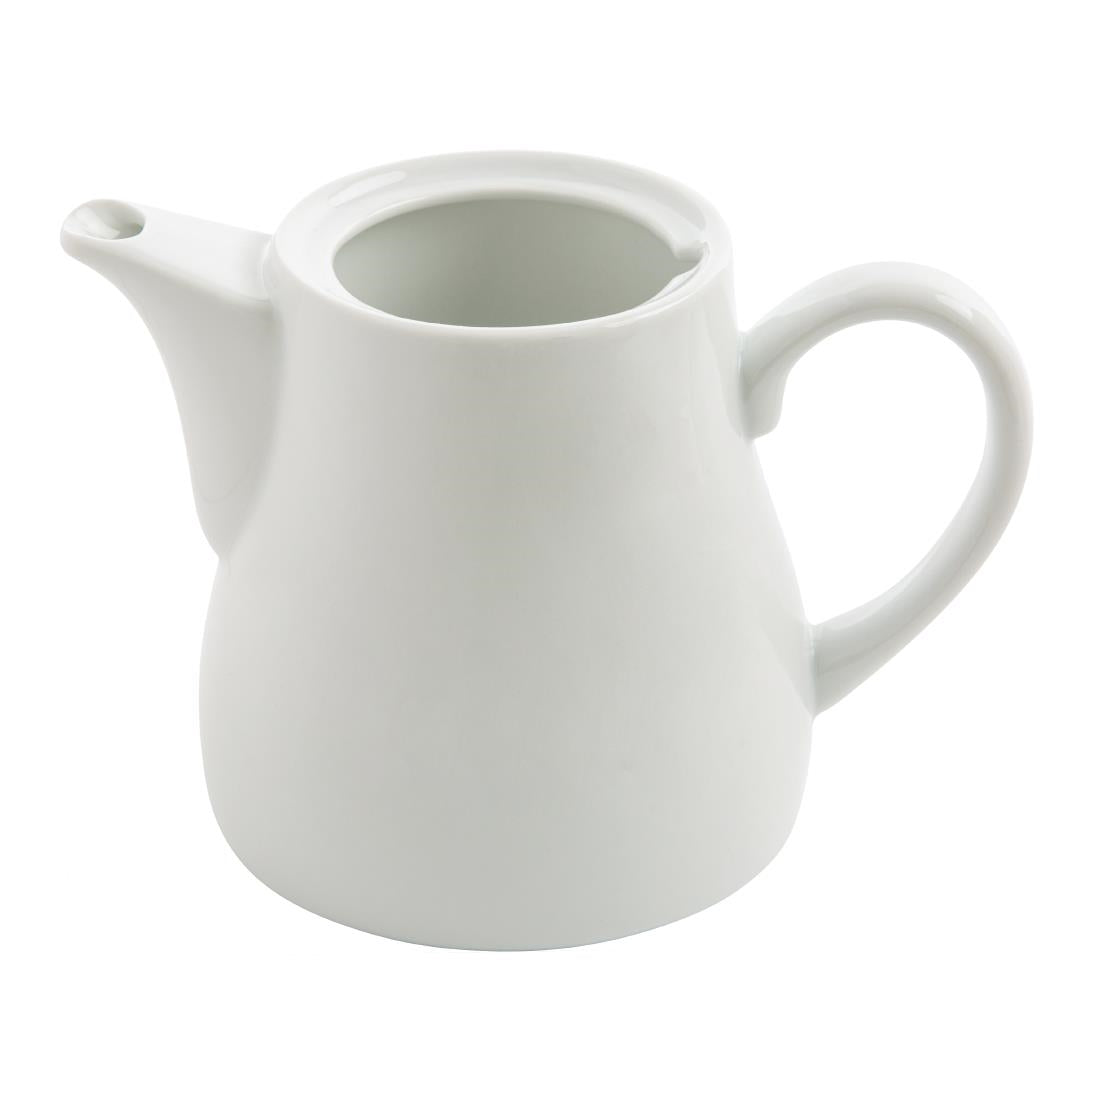 Olympia Whiteware Teapots 795ml (Pack of 4)